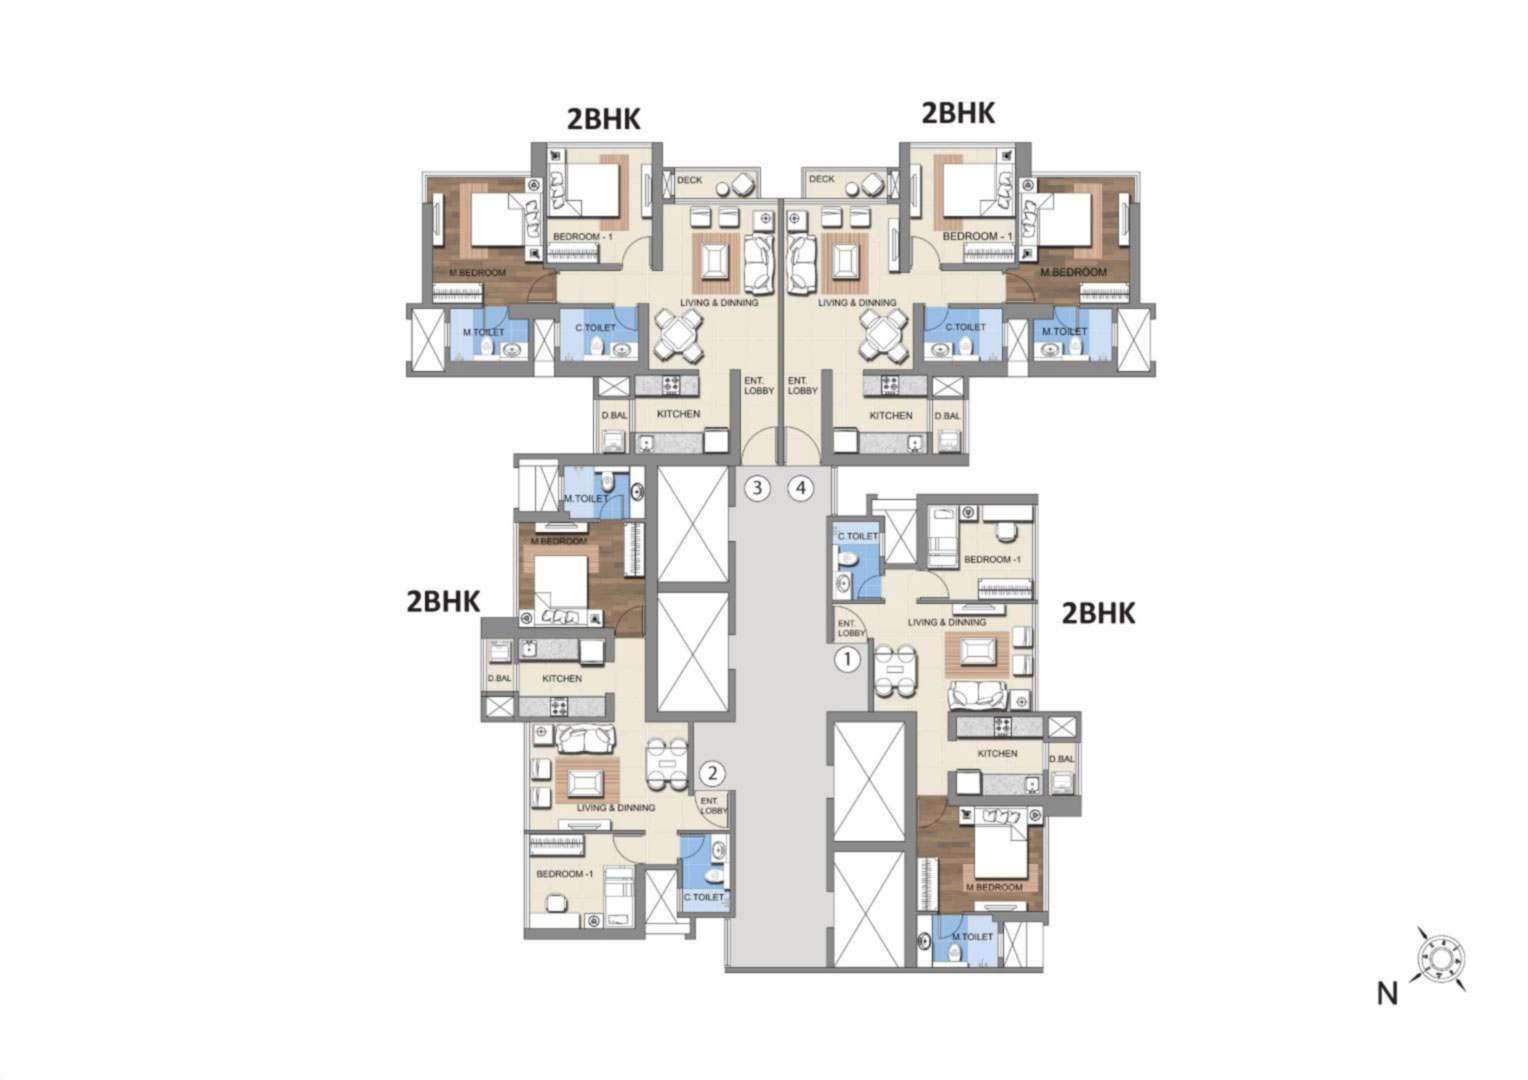 FLOOR PLAN for upcoming project in mulund